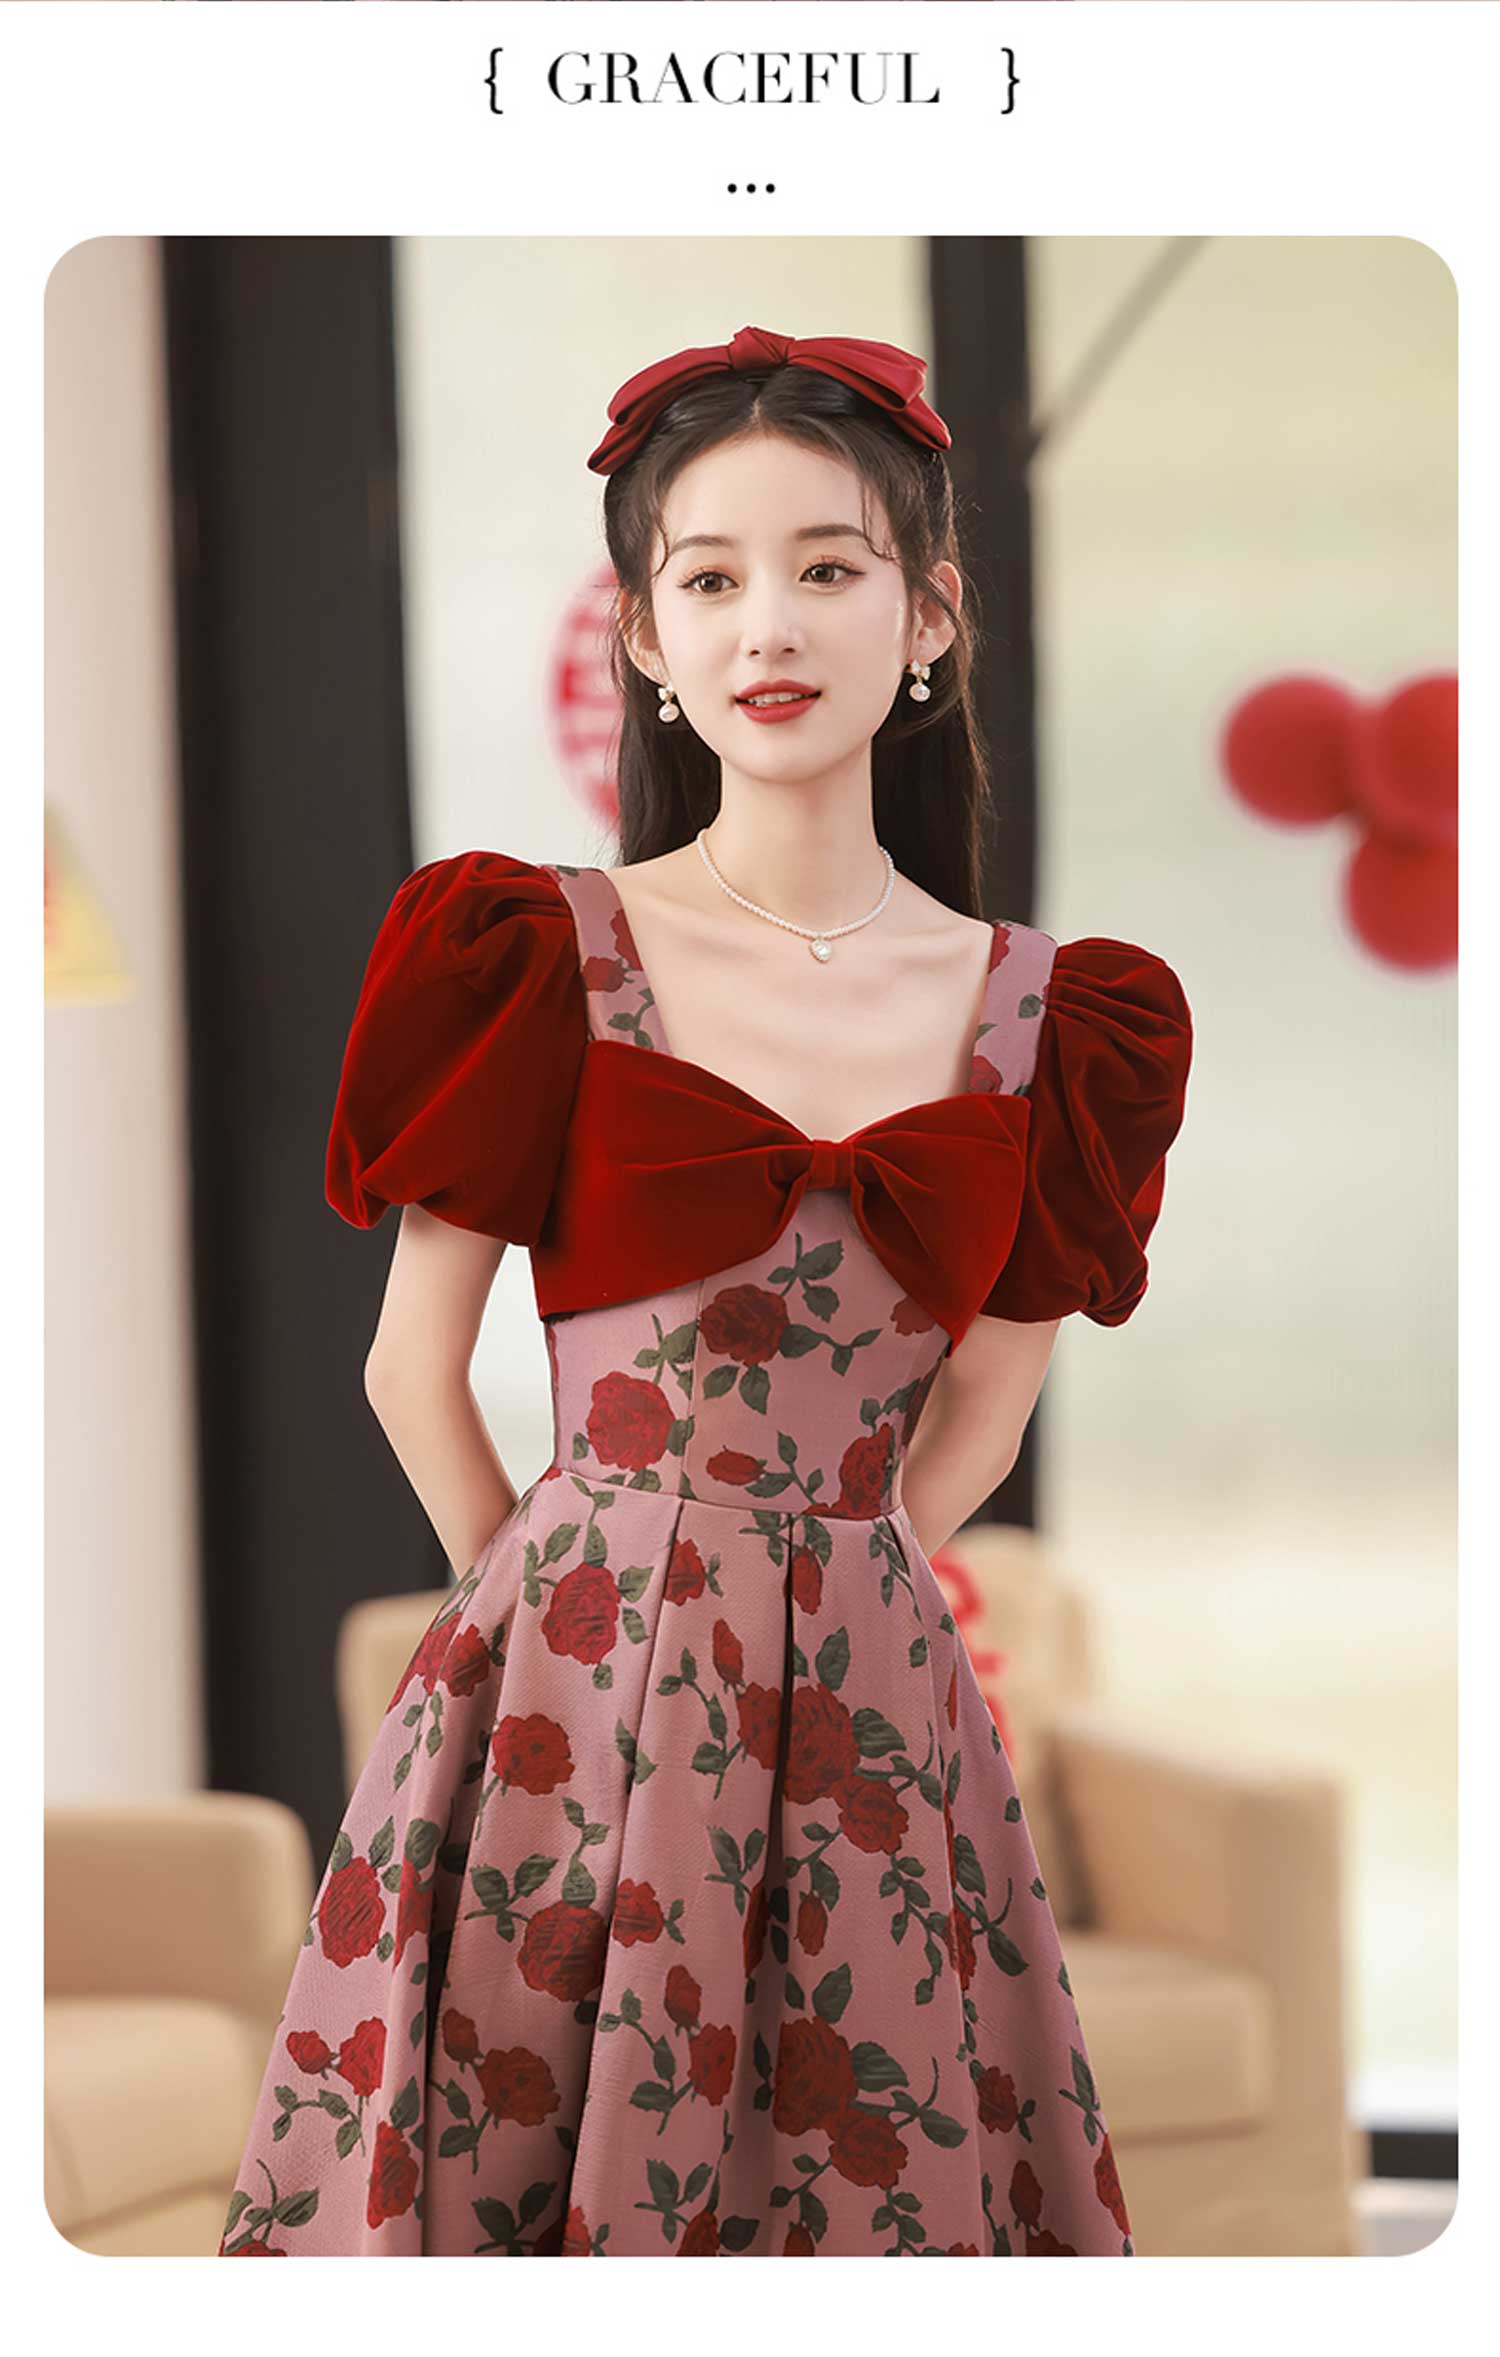 Aesthetic-Floral-Short-Sleeve-Mid-Length-Cocktail-Banquet-Party-Dress10